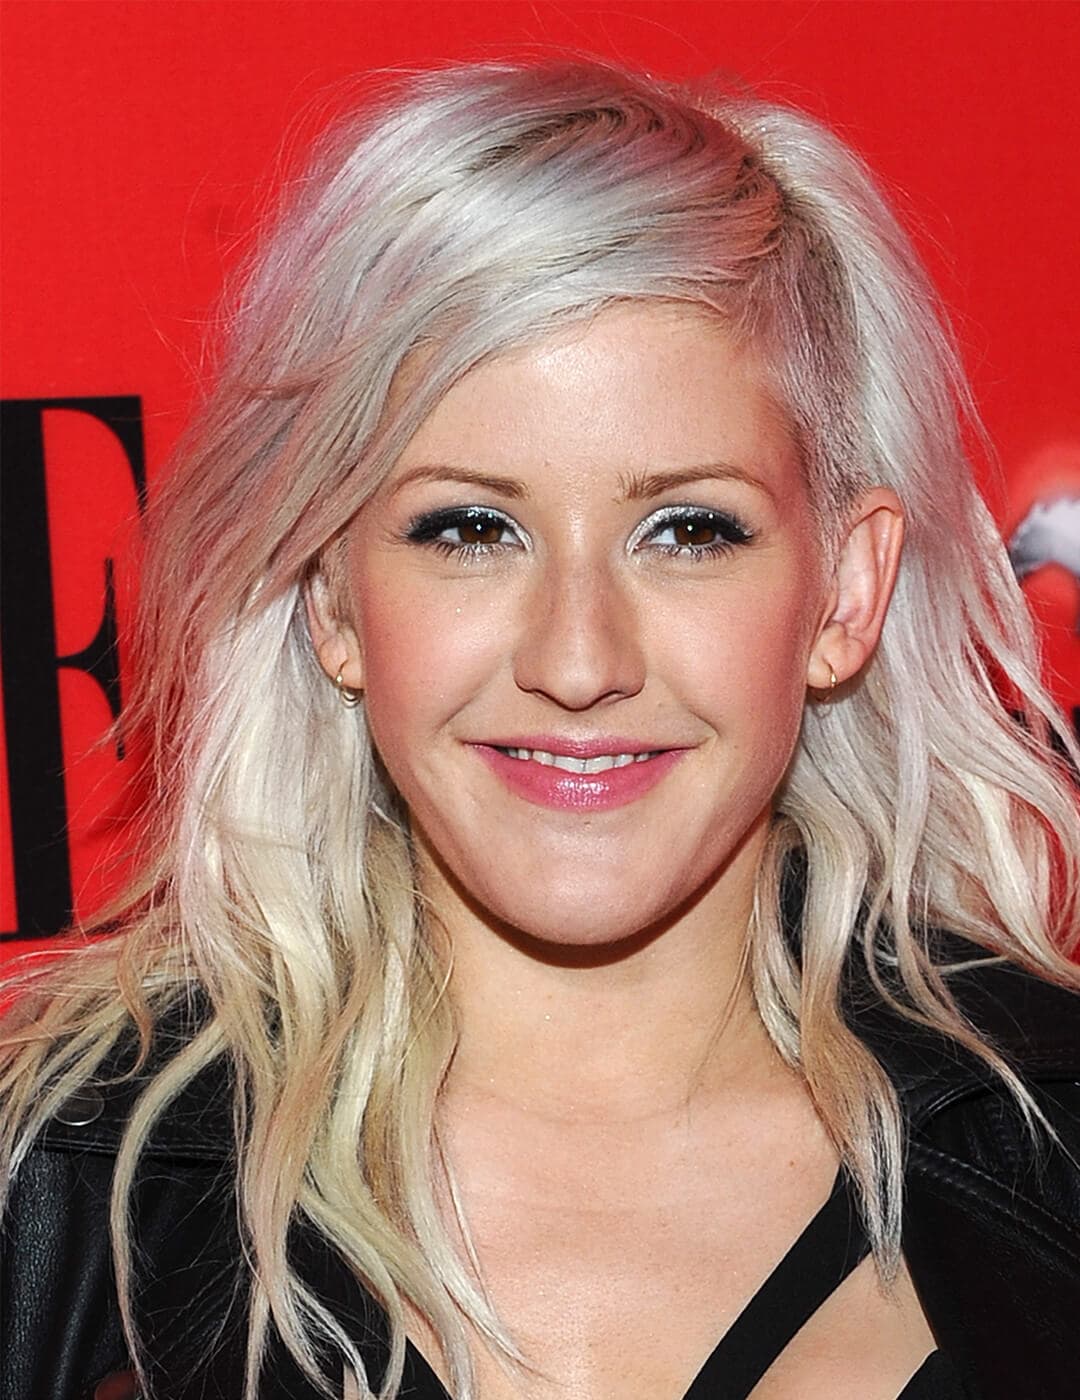 A photo of Ellie Goulding with a hidden undercut hairstyle waring a black dress